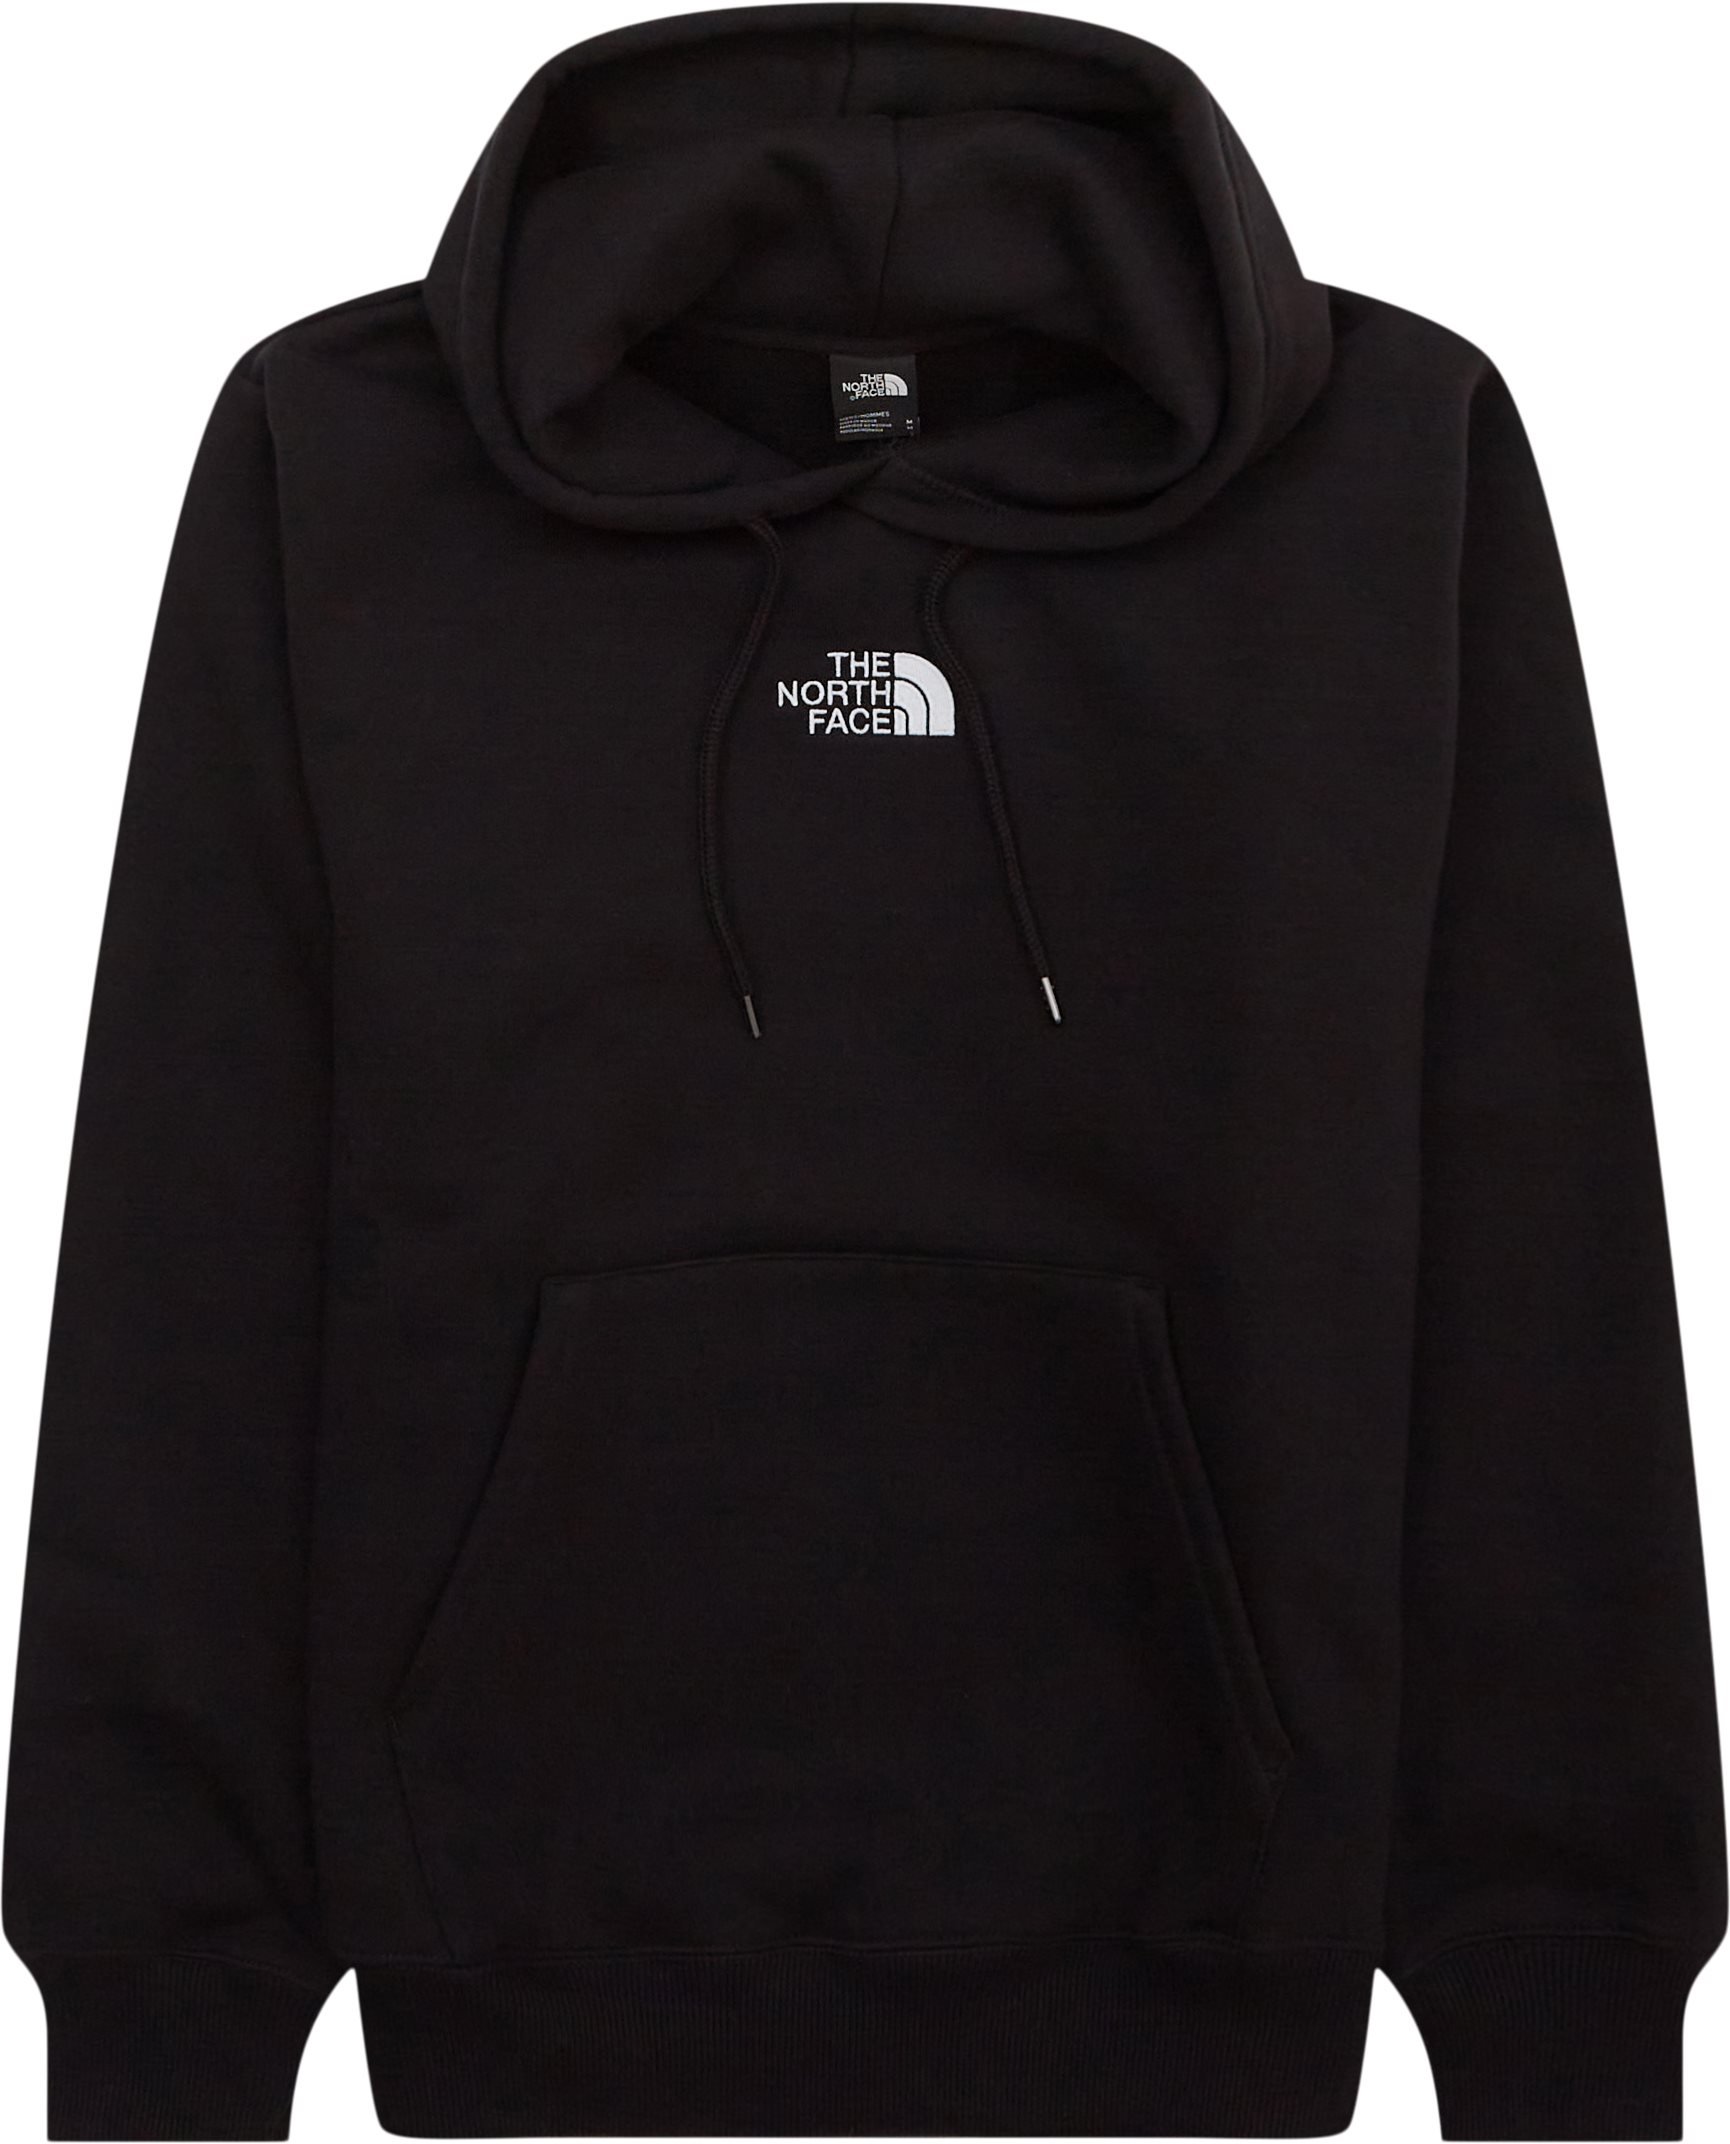 The North Face Sweatshirts HEAVYWEIGHT HOODIE NF0A84GKKY41 Black